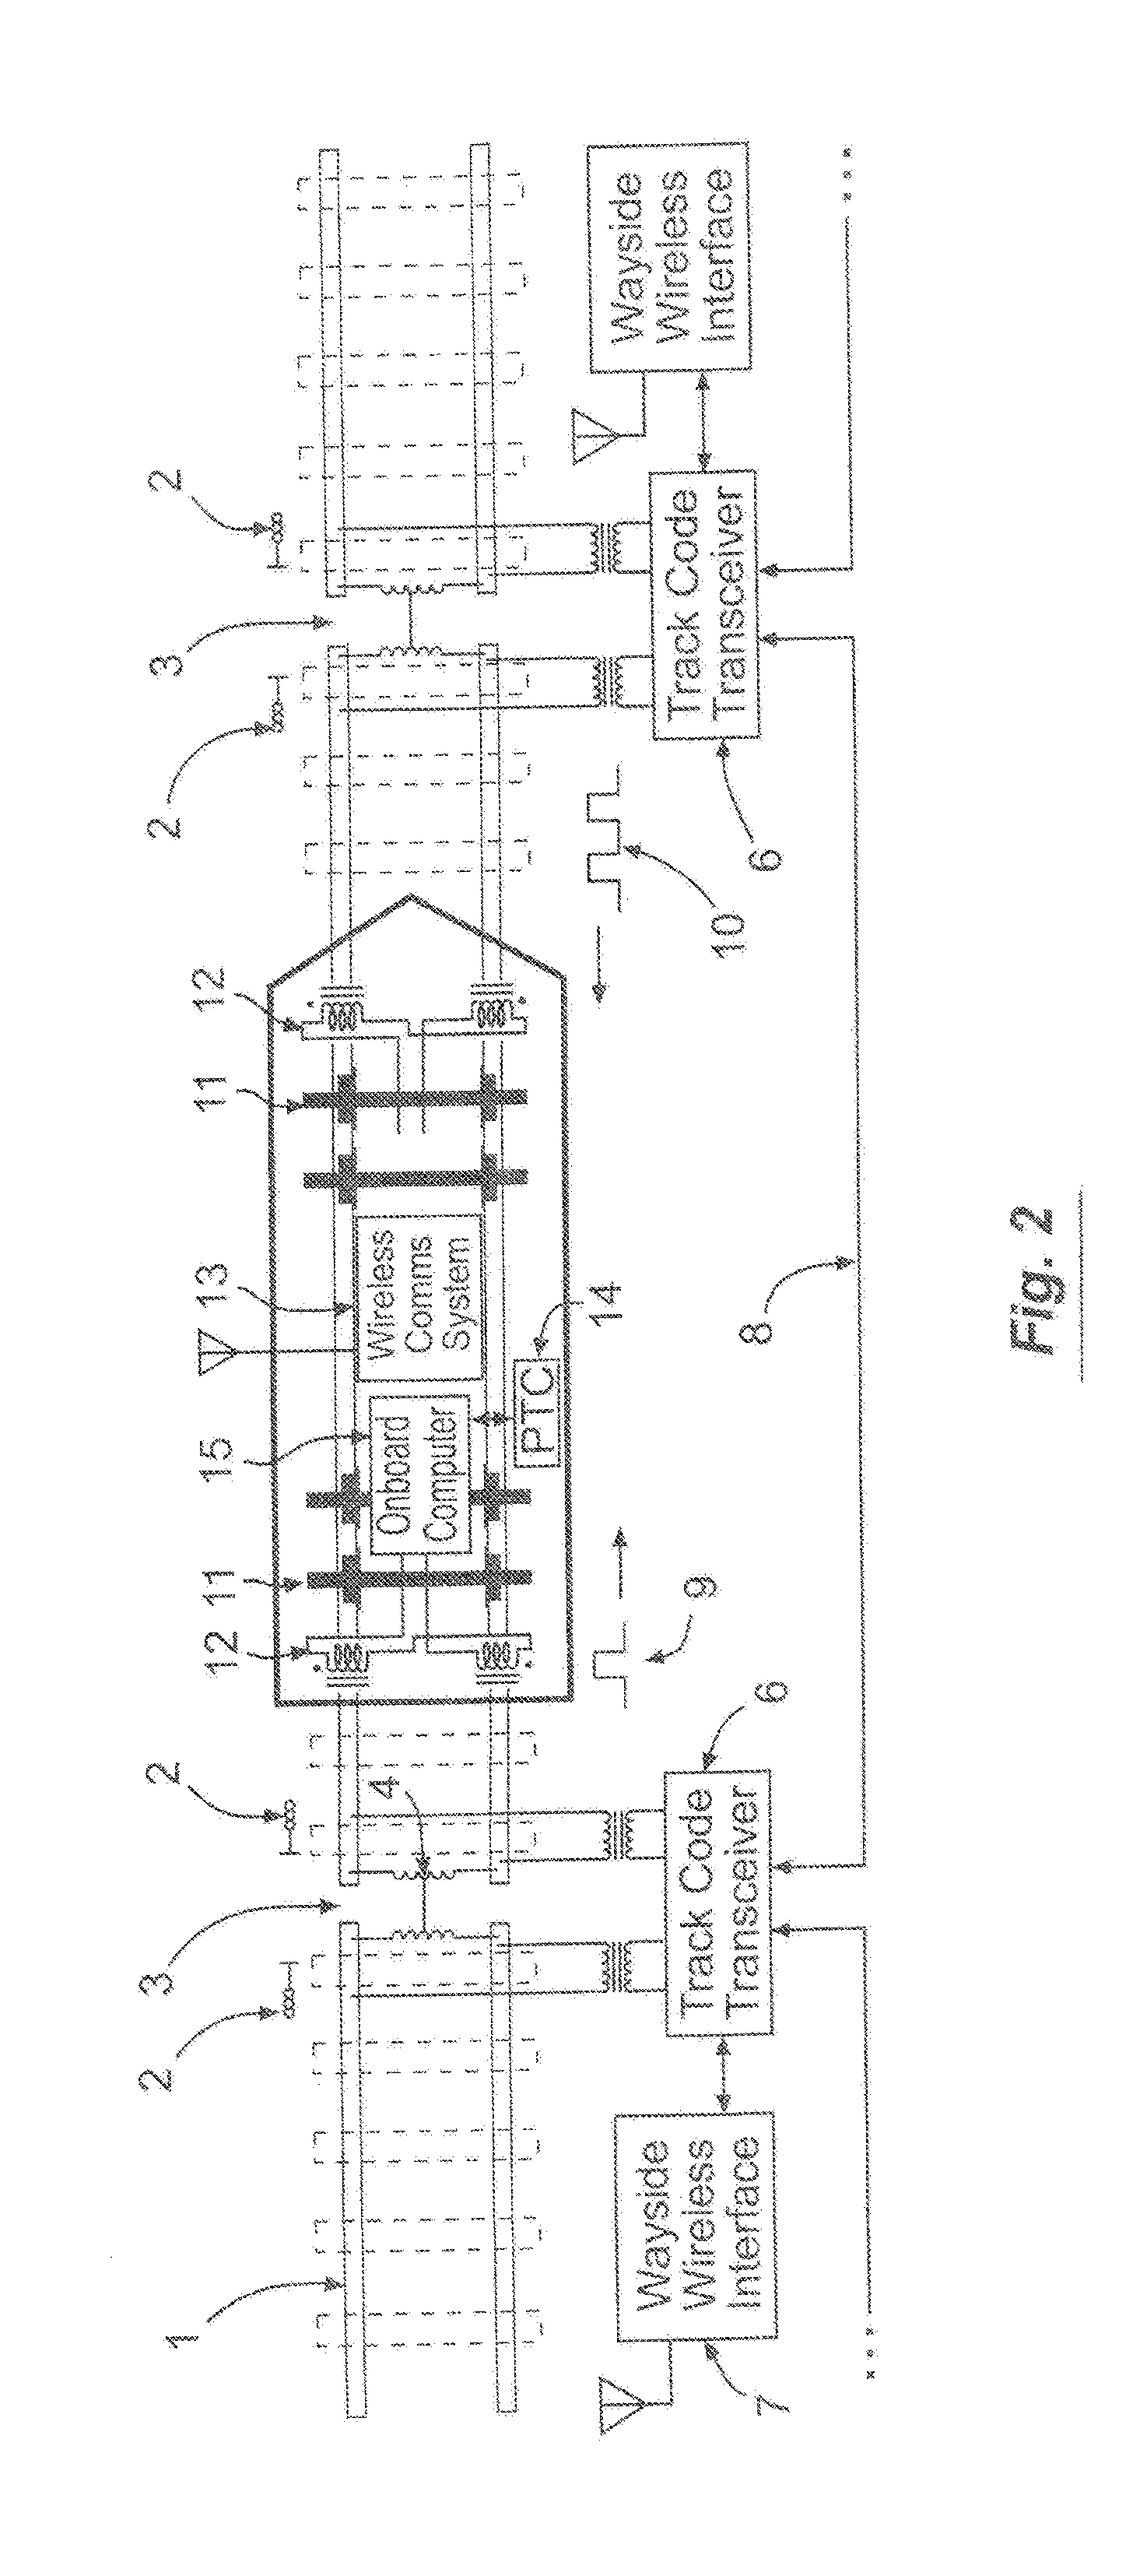 Method for detecting the extent of clear, intact track near a railway vehicle